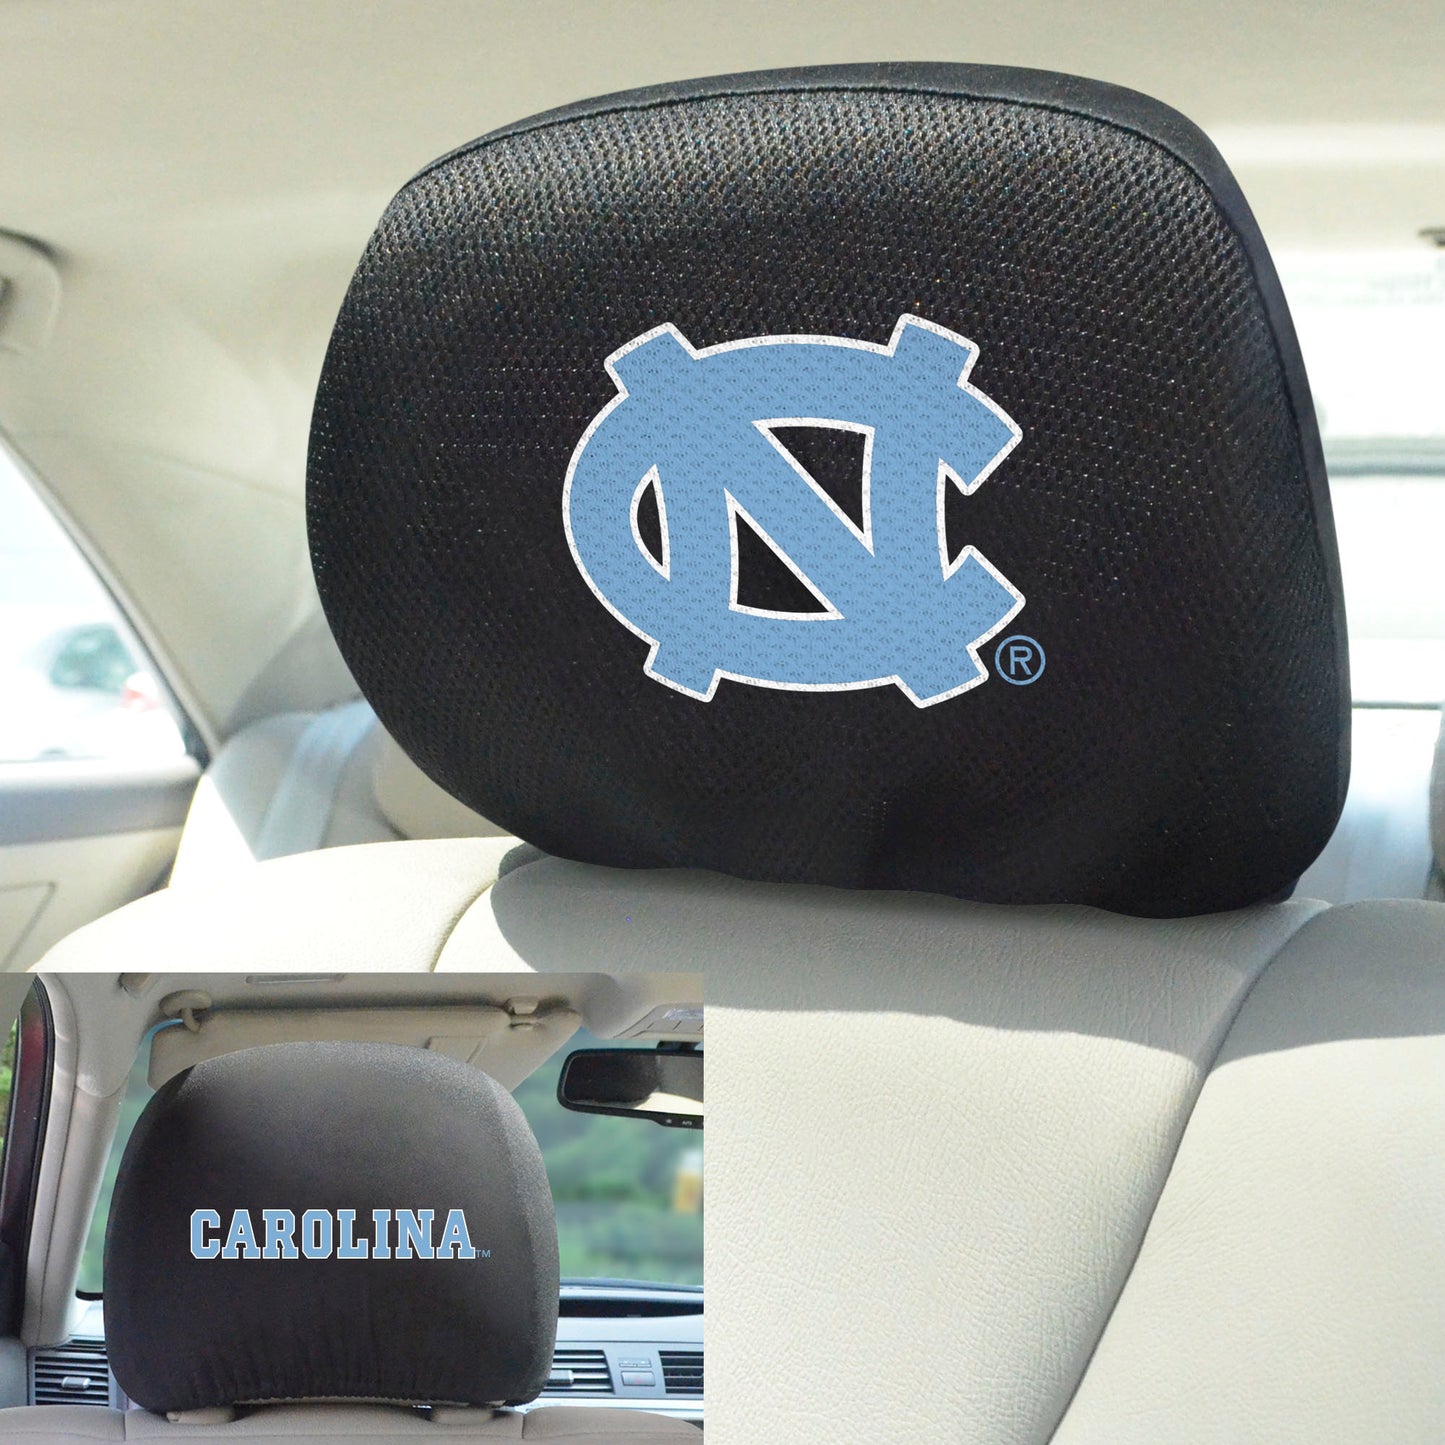 North Carolina Tar Heels Head Rest Cover with NC Logo & Wordmark by Fanmats